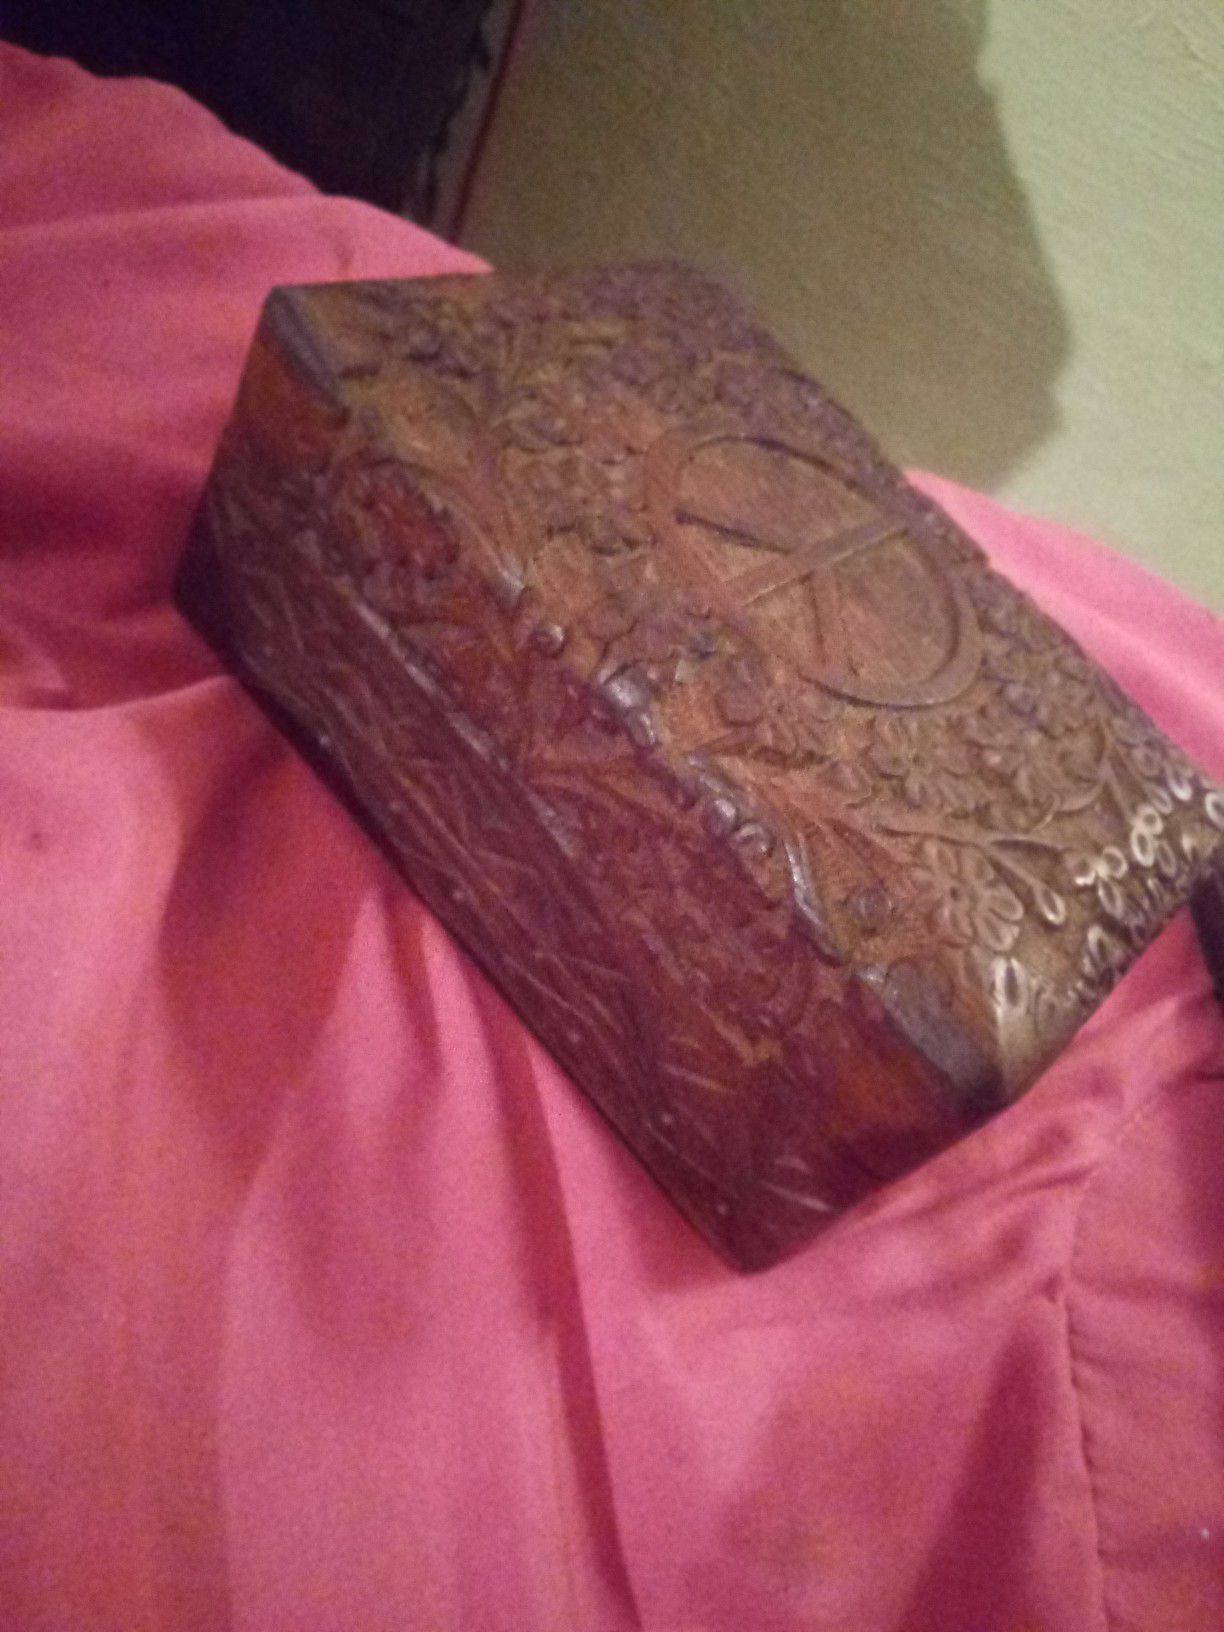 Hand Carved Wooden Jewelry Box